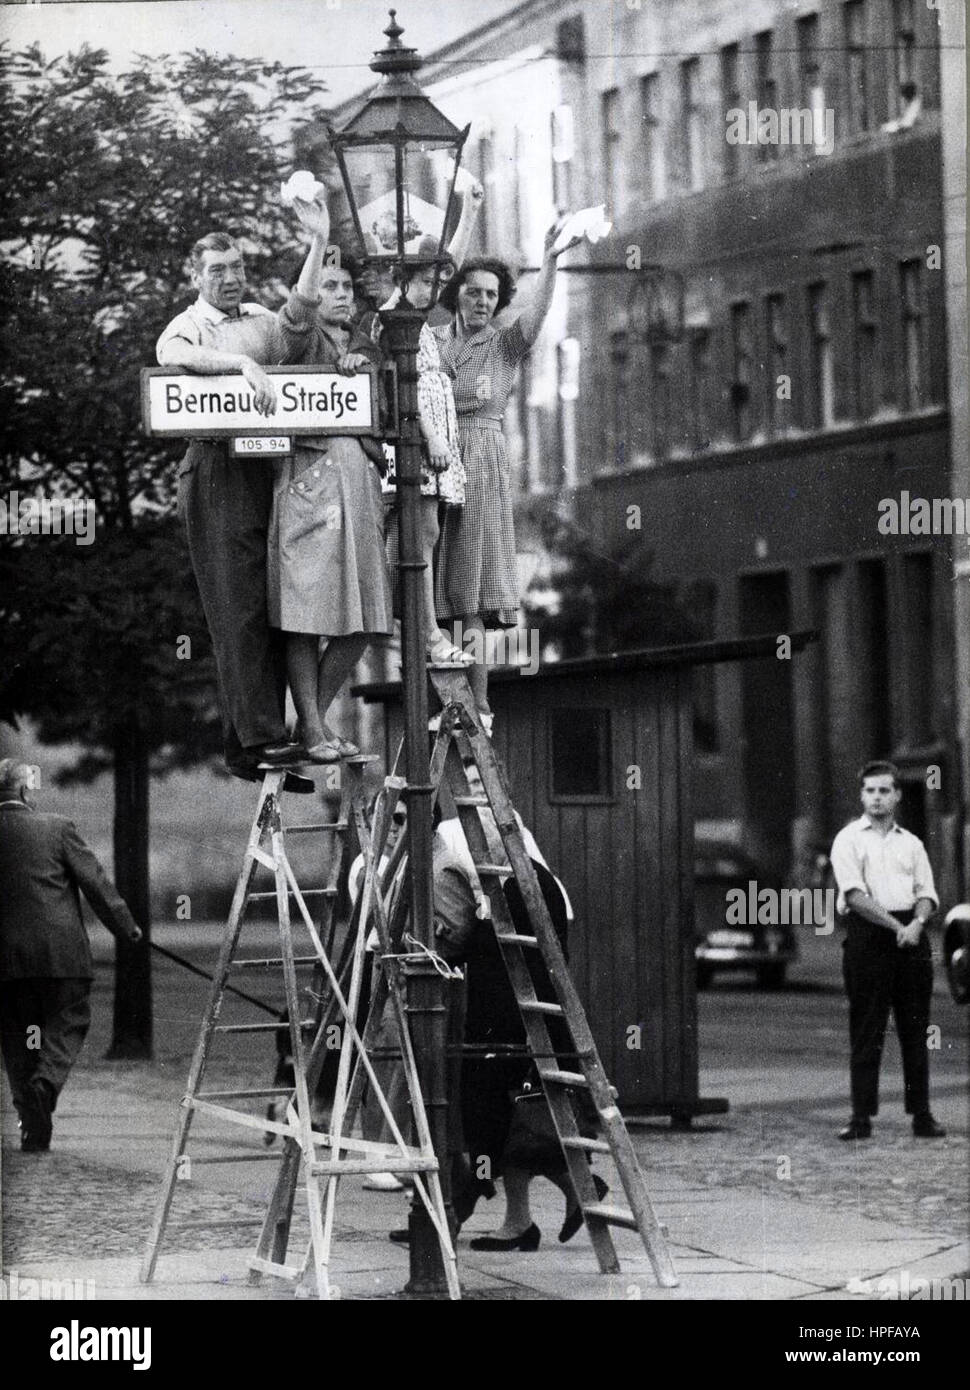 West Berliners stand on ladders to greet friends and loved ones on the eastern side of the Berlin Wall, West Berlin, Germany, 01/01/1961. Stock Photo